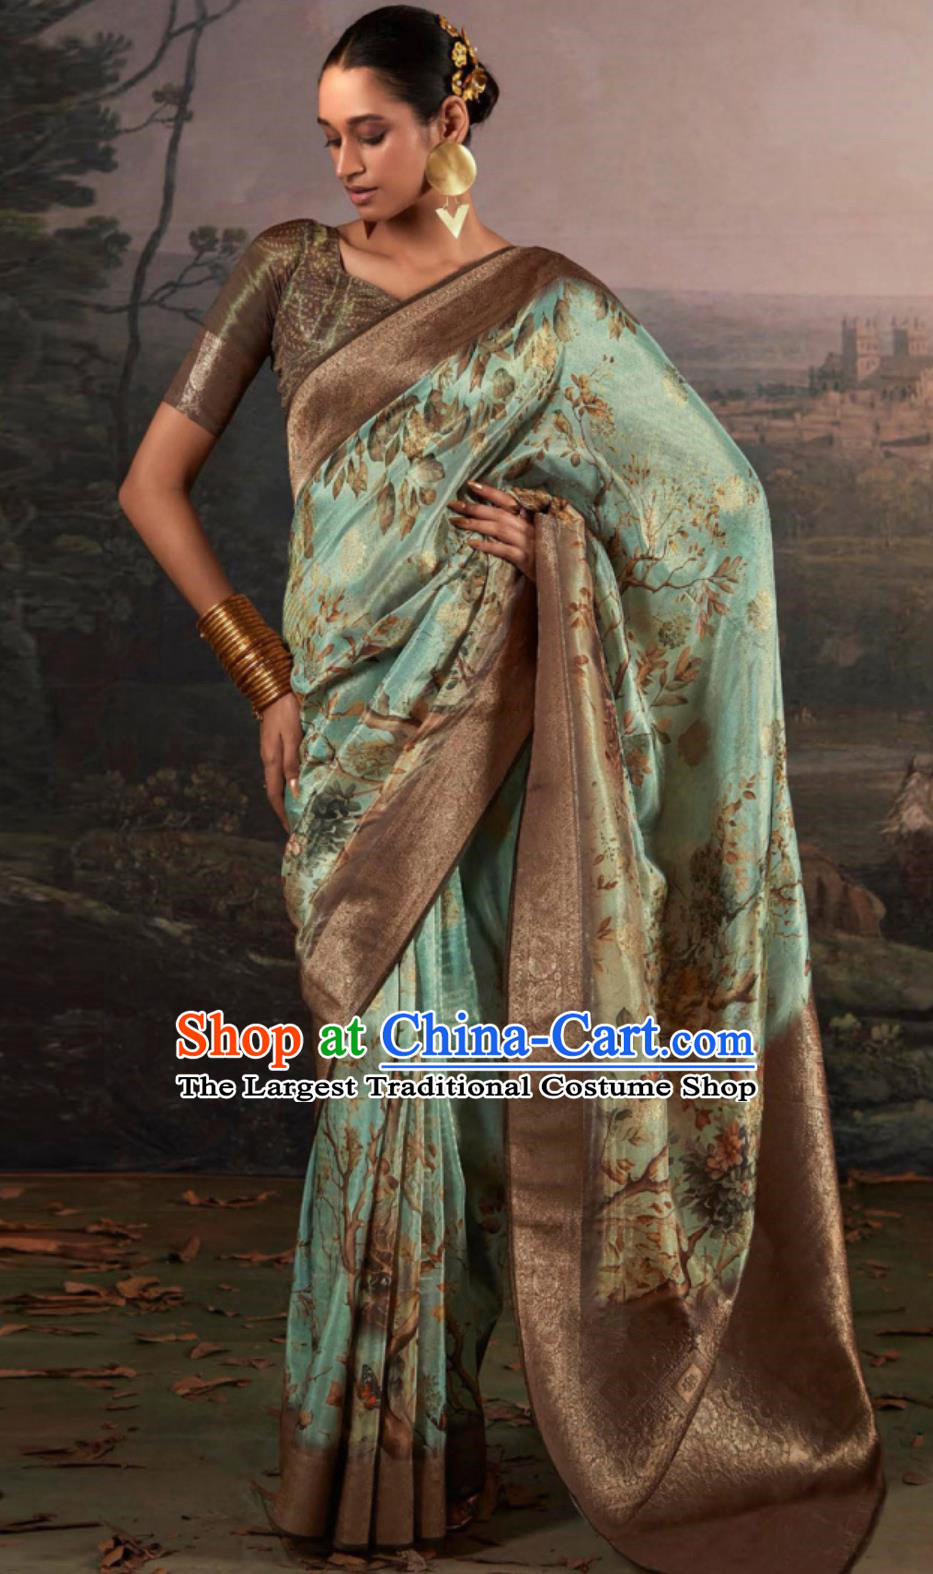 Light Green Indian Saree Features Traditional Silk Print National Ladies Wrap Skirt Sari Daily Festival Outfit